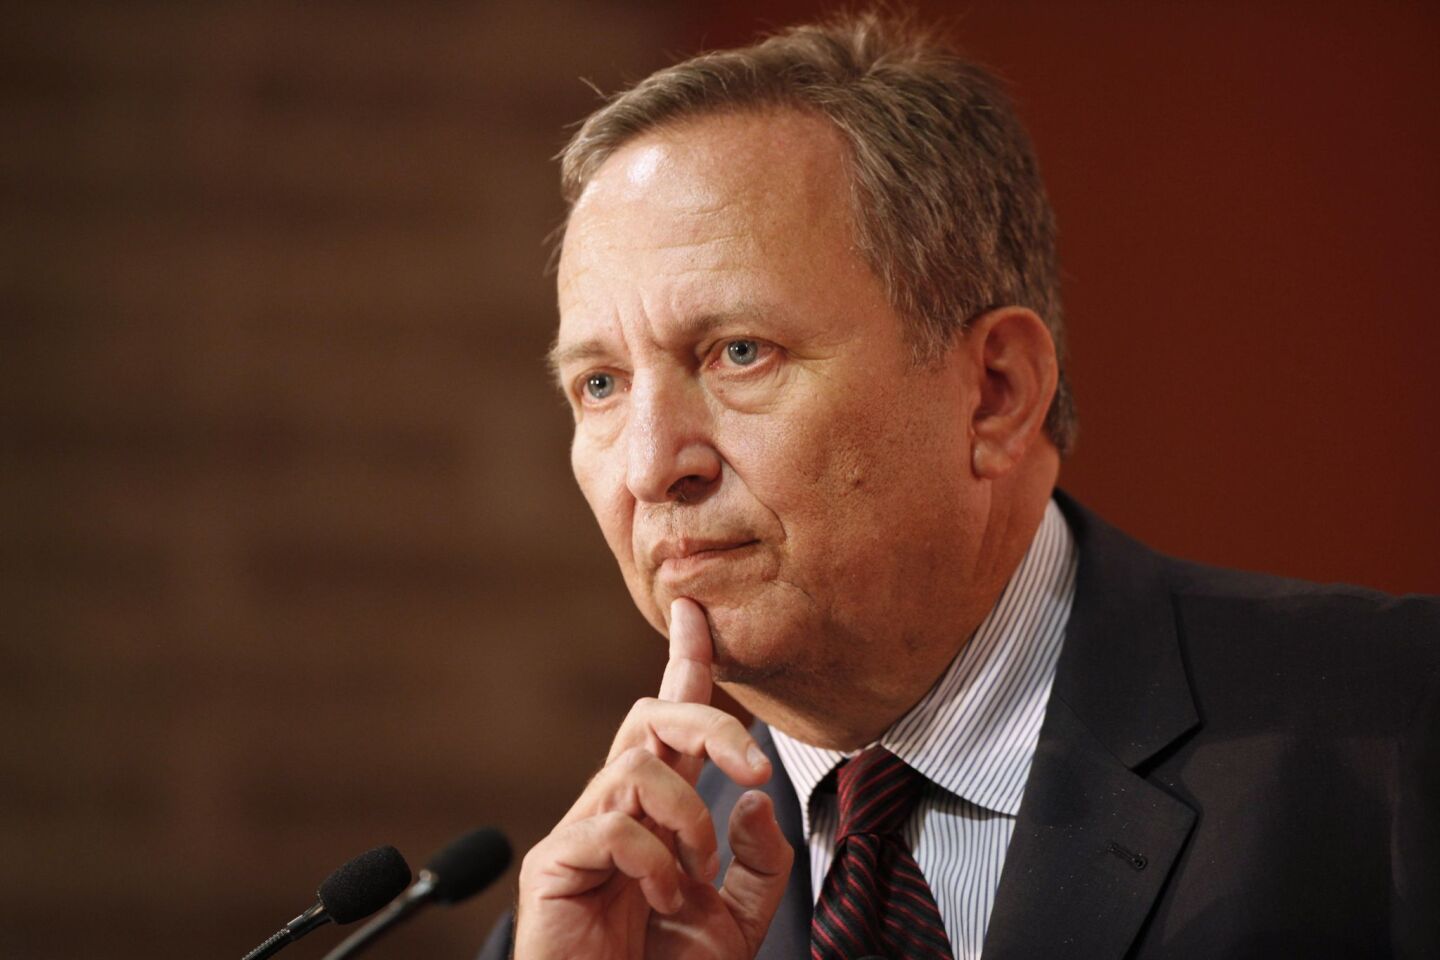 National Economic Council Director Lawrence Summers